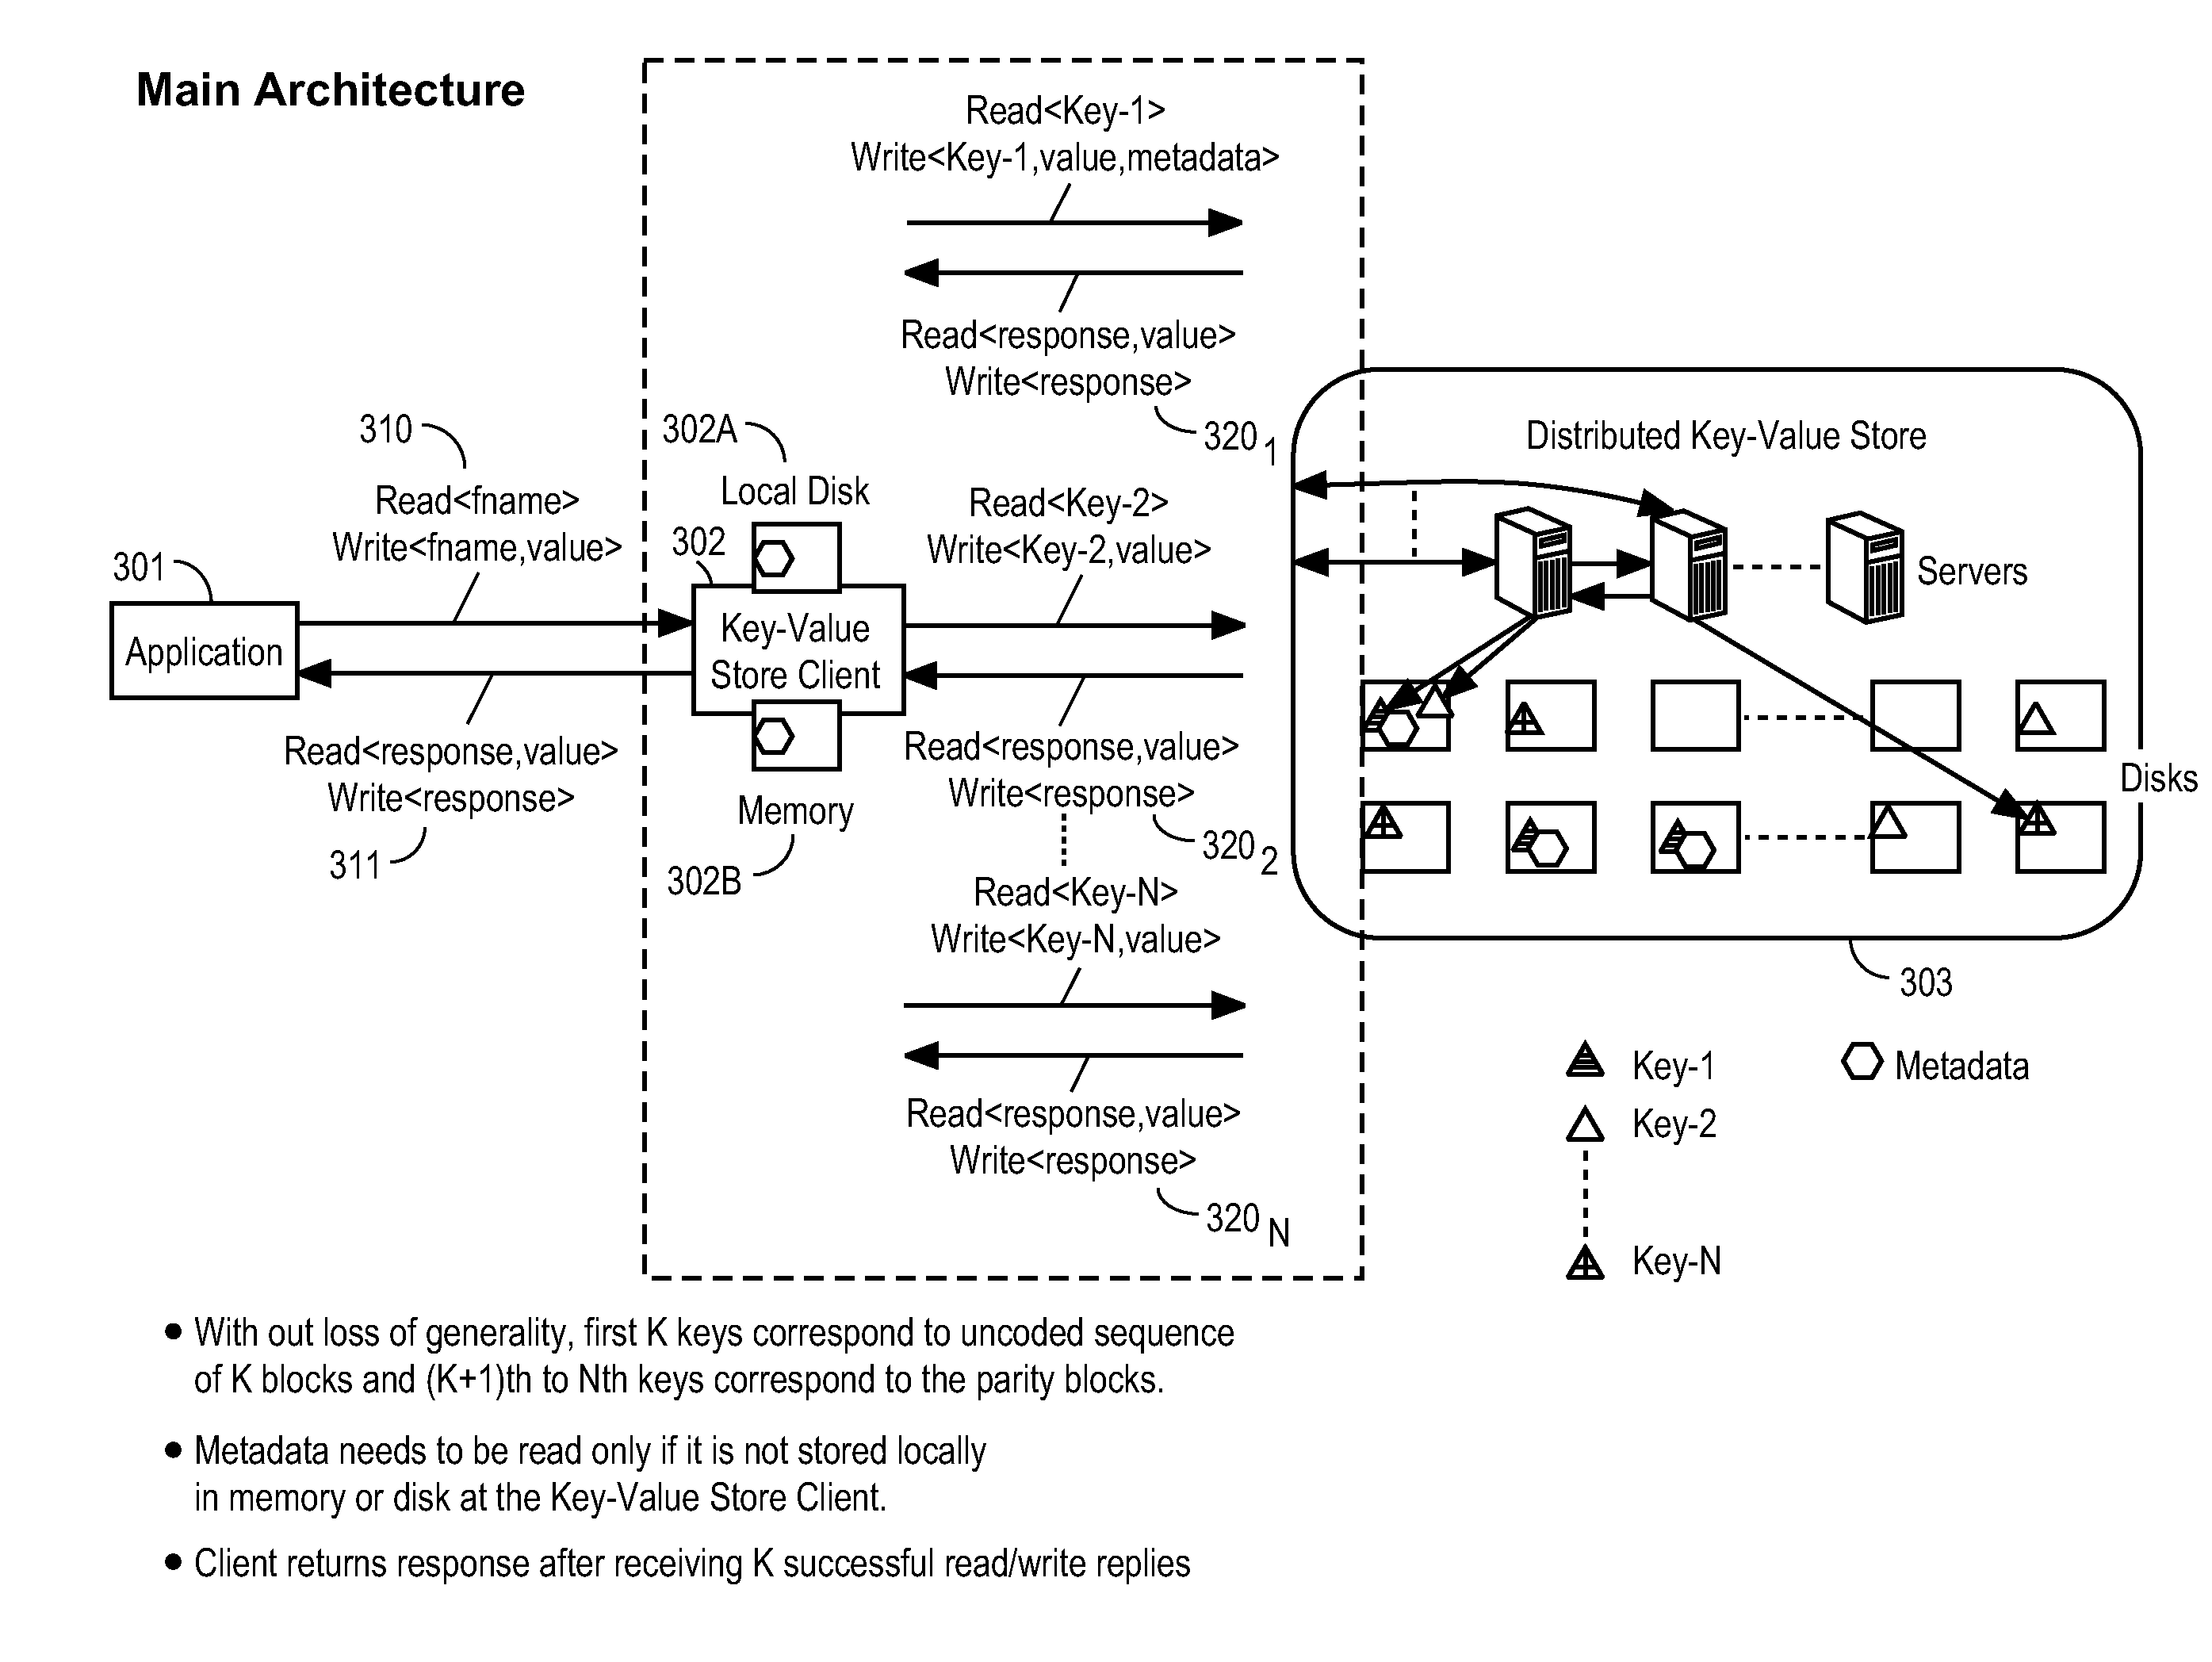 Method and apparatus for low delay access to key-value based storage systems using fec techniques